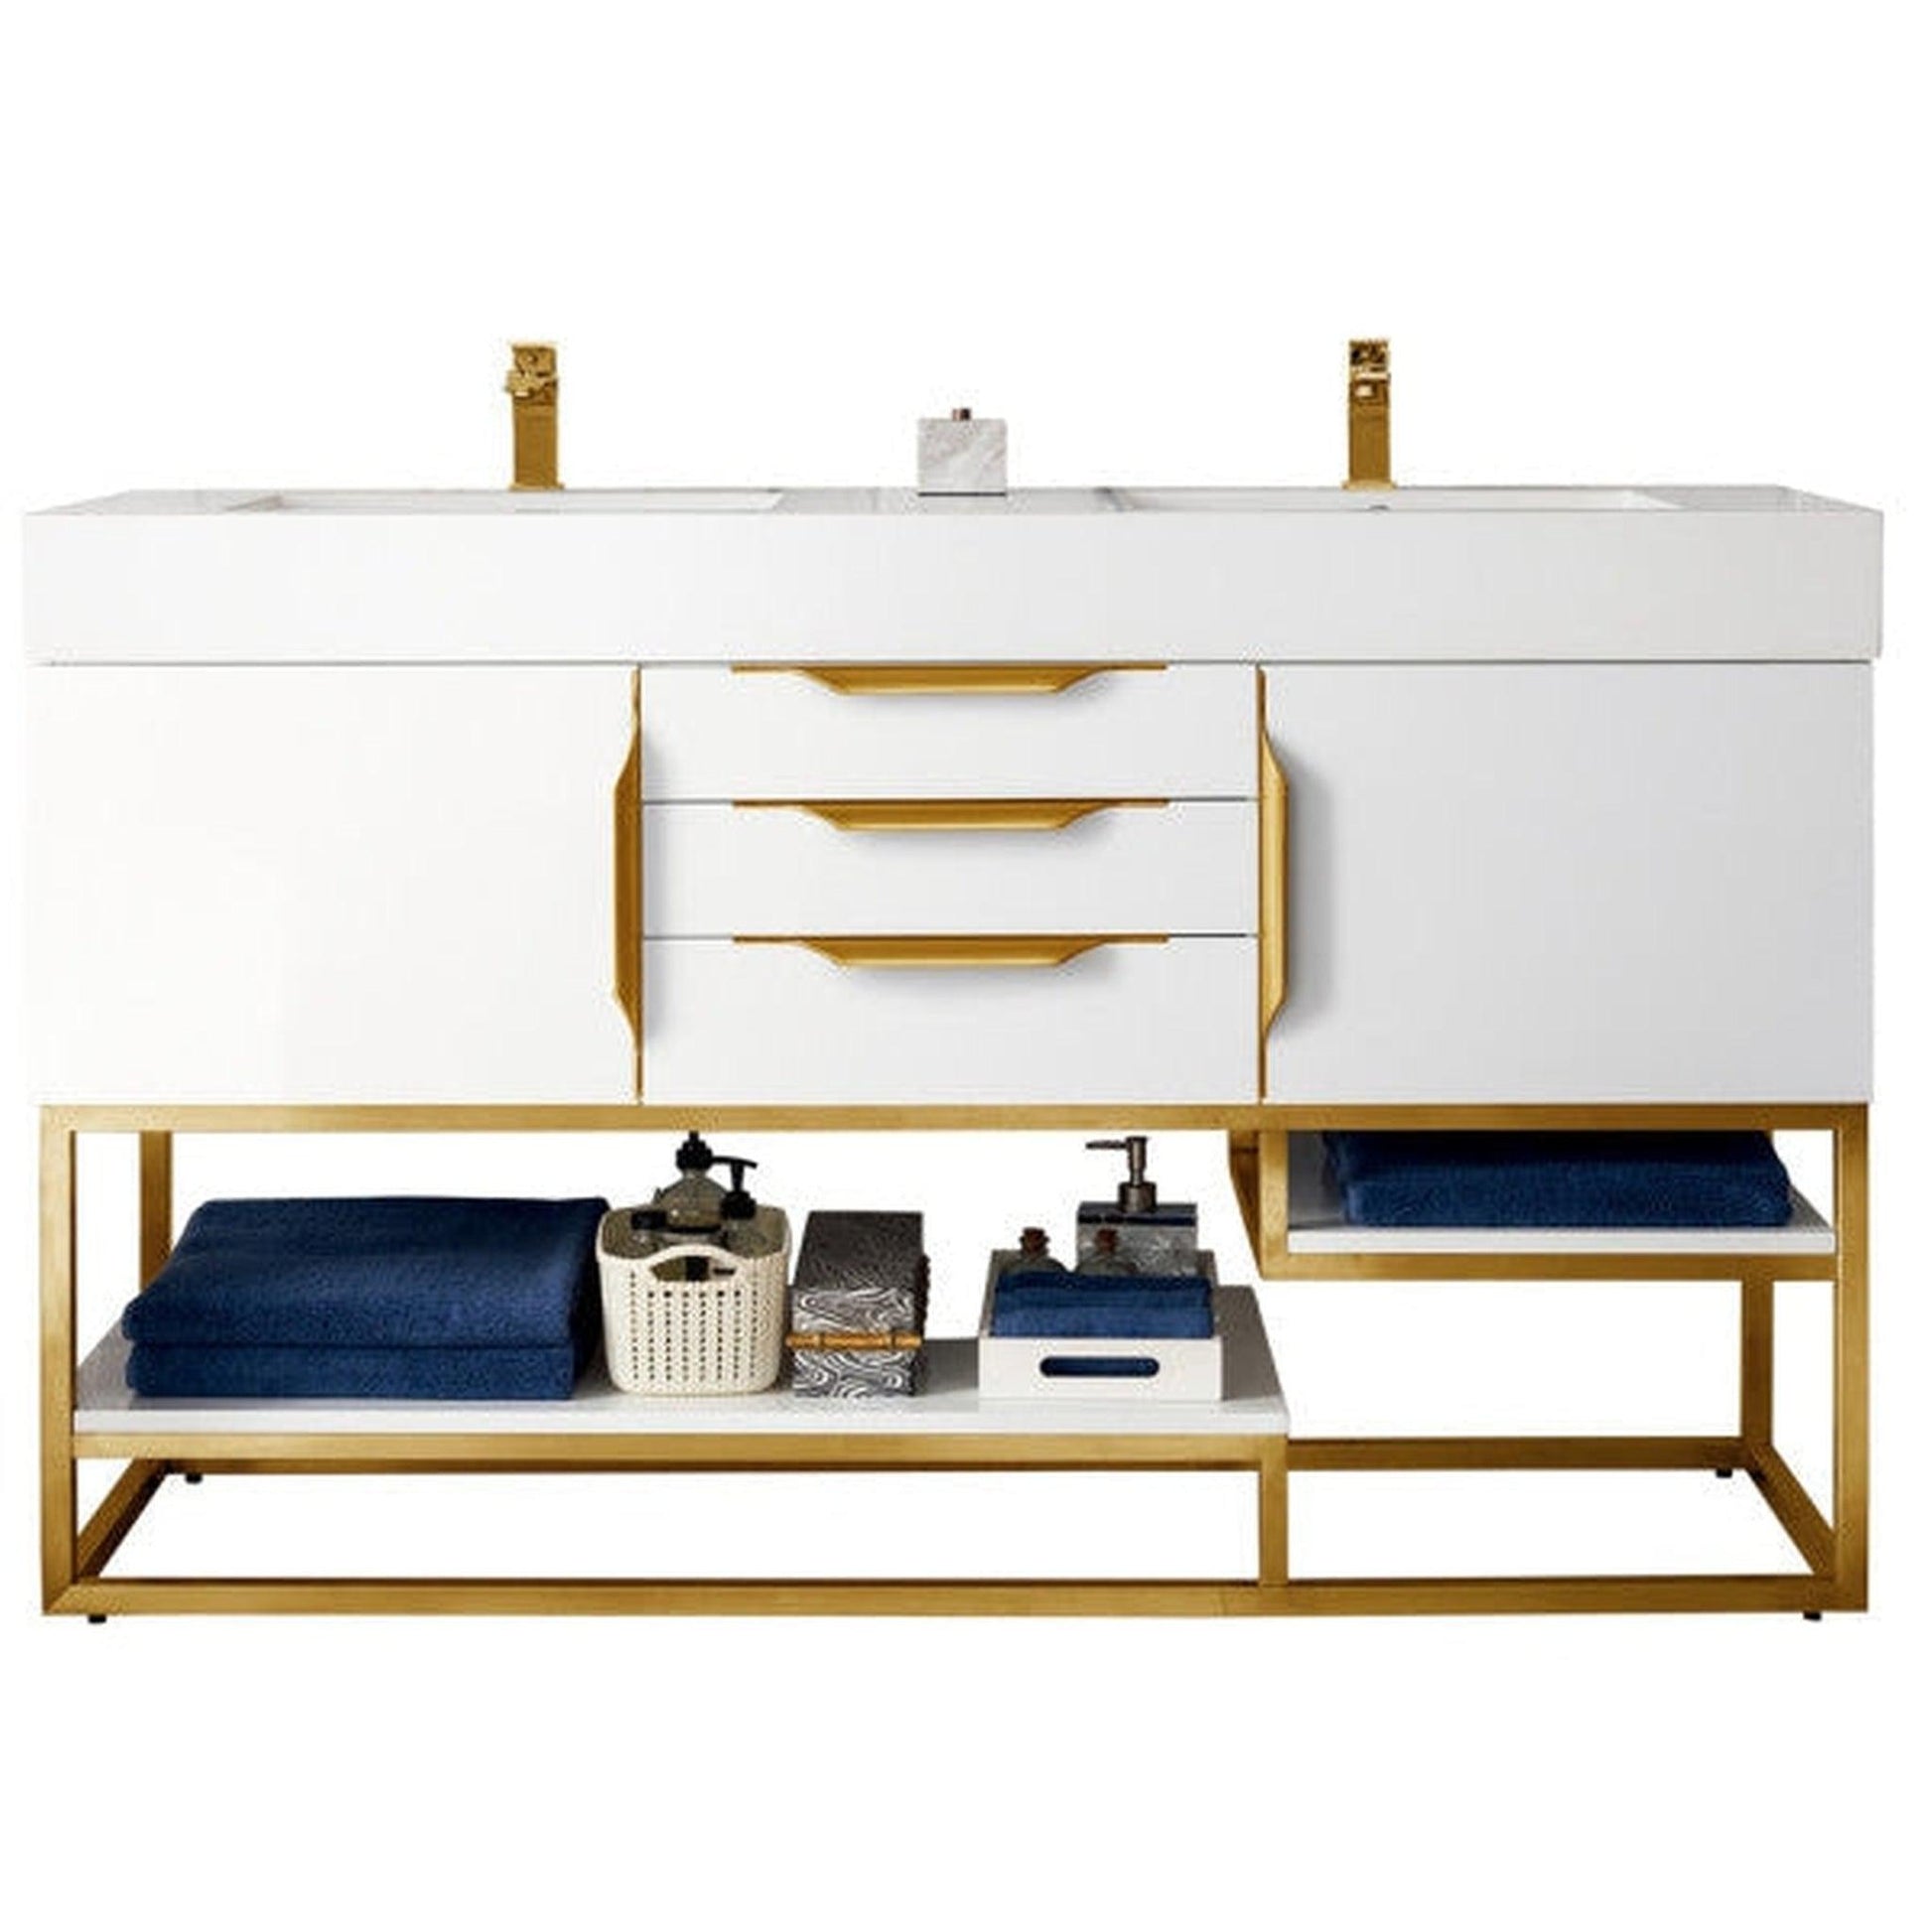 James Martin Columbia 59" Double Glossy White Bathroom Vanity With Radiant Gold Hardware and 6" Glossy White Composite Countertop